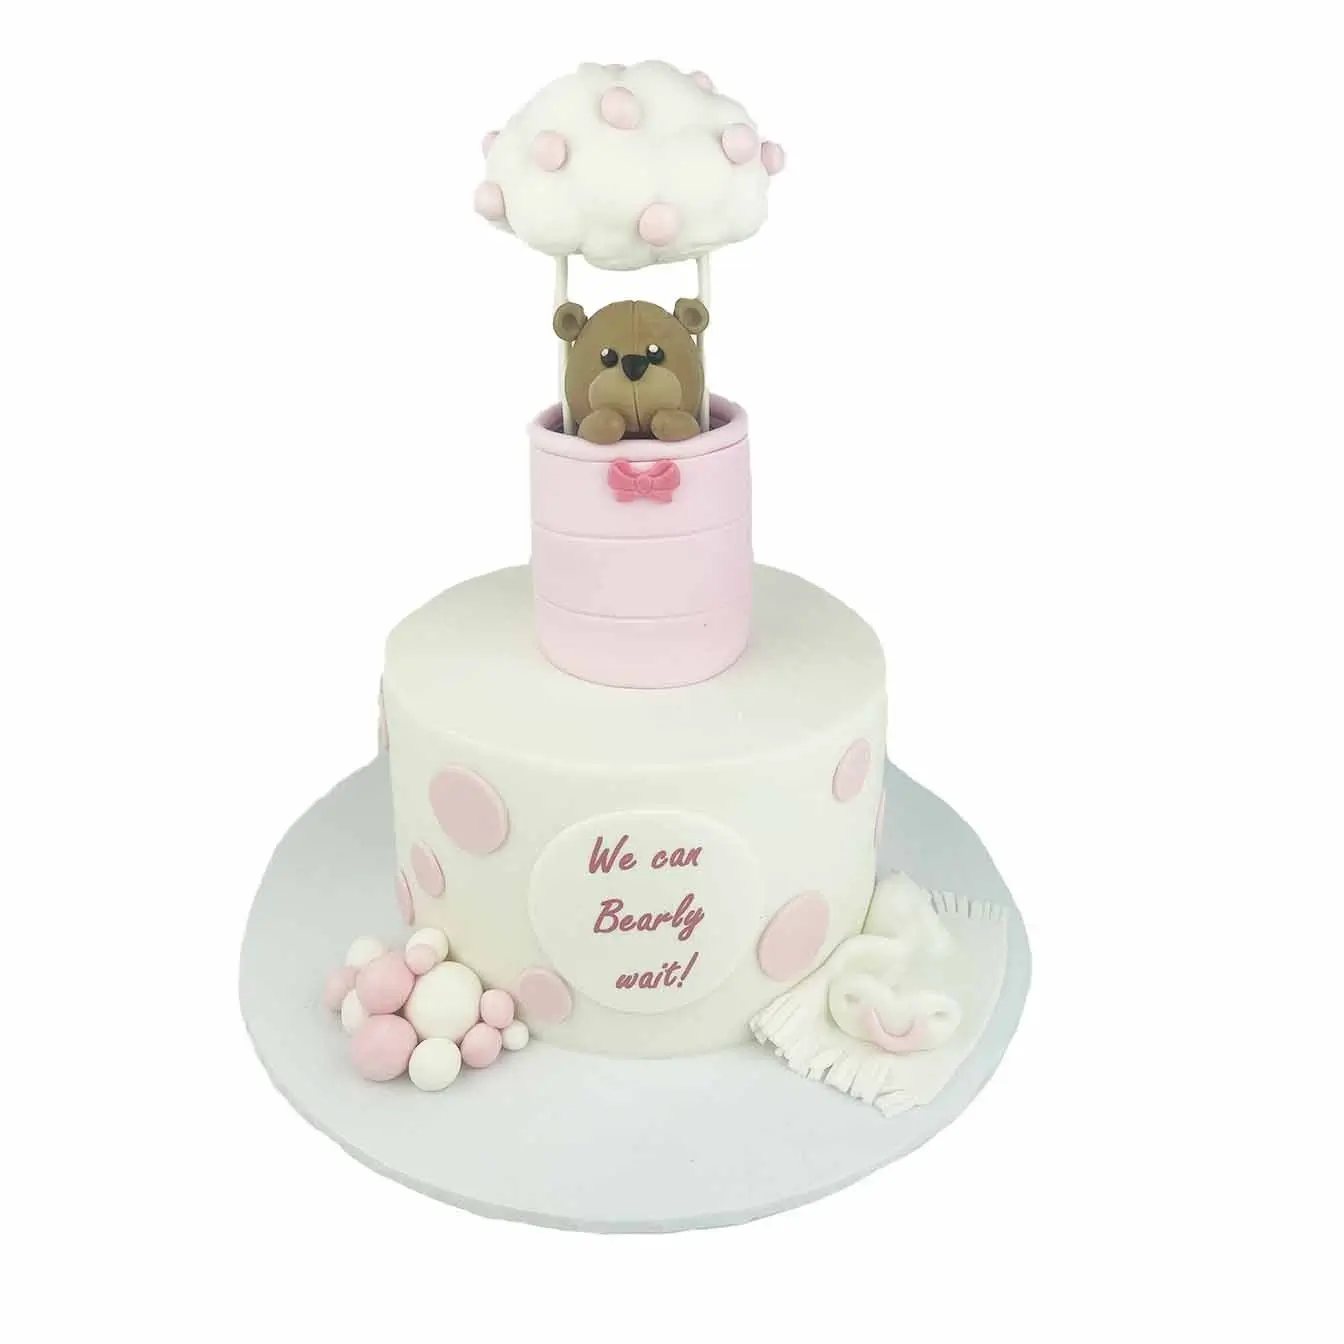 Bearly Wait Baby Shower Cake - Single tier white fondant cake with colorful polka dots, molded teddy bears in hot air balloons, perfect for celebrating the anticipation of a new arrival.